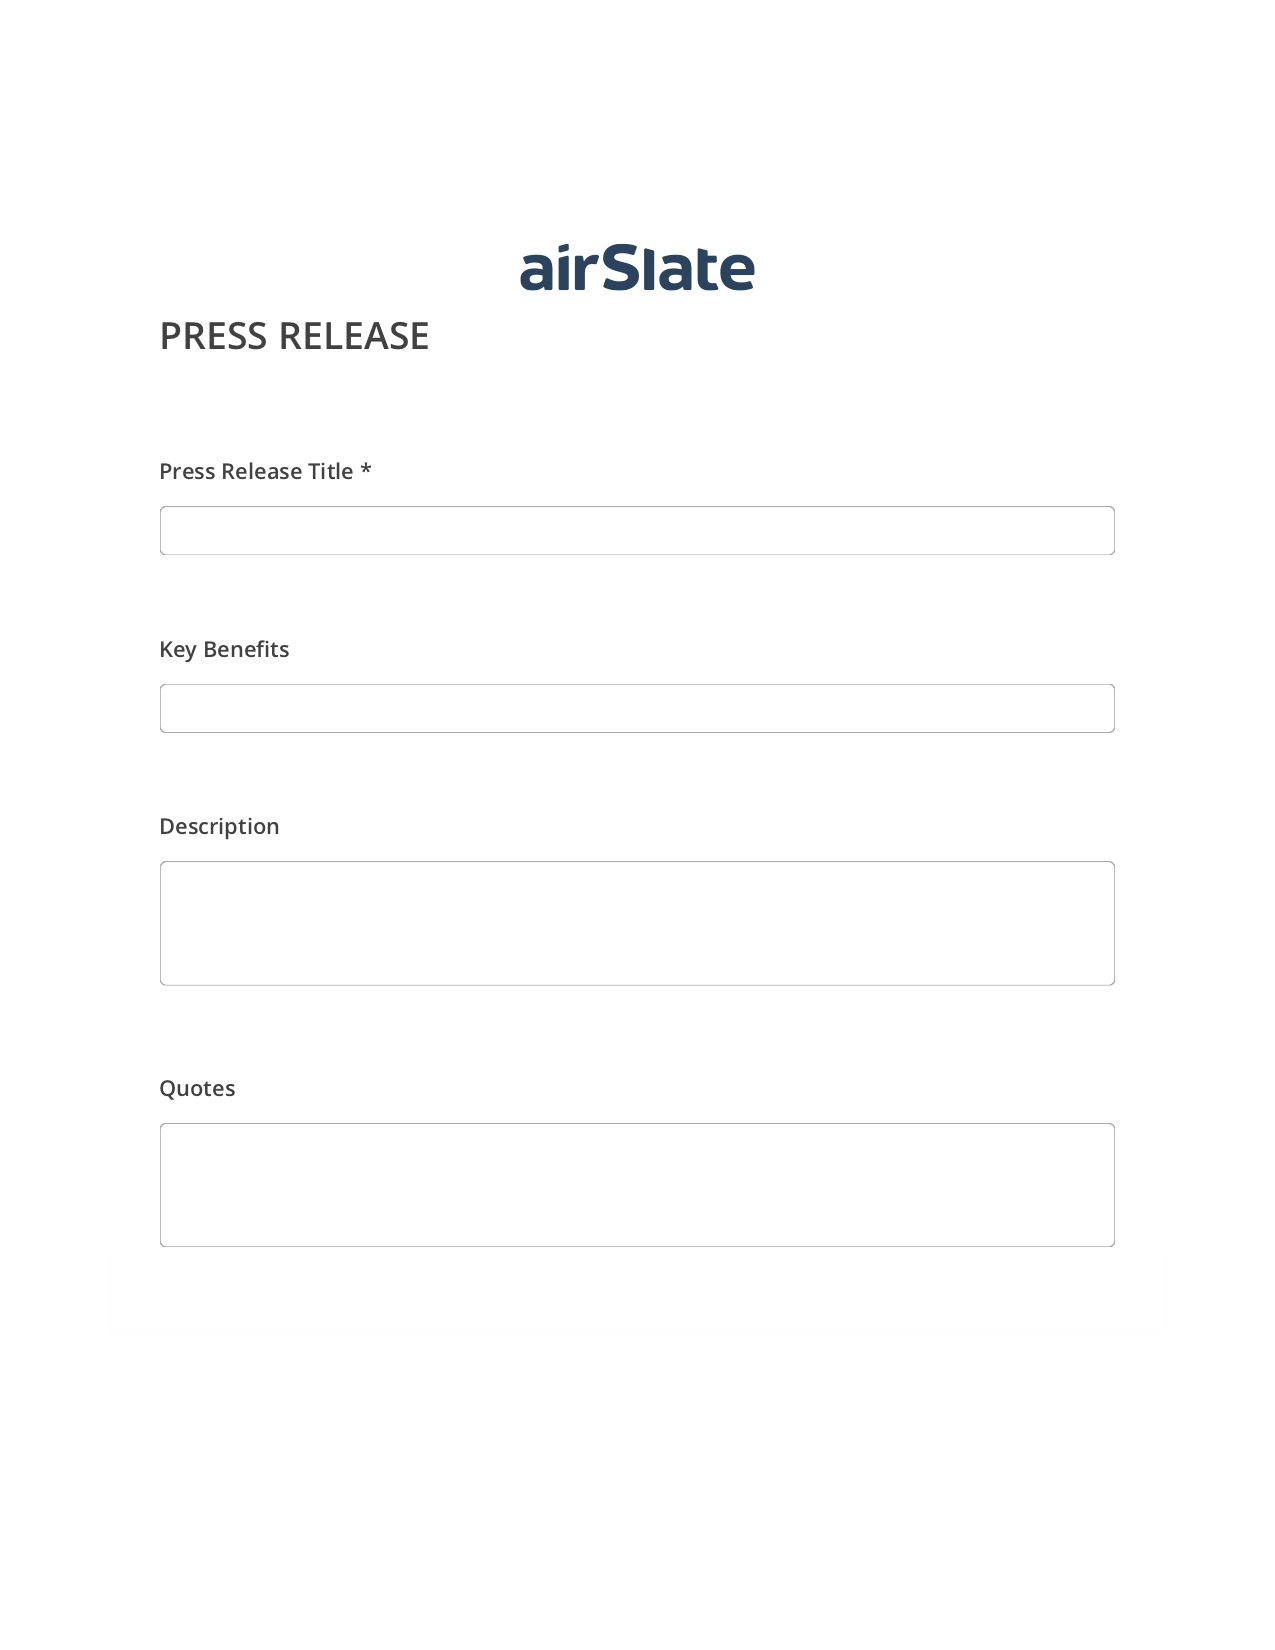 Press Release Flow Remove Tags From Slate Bot